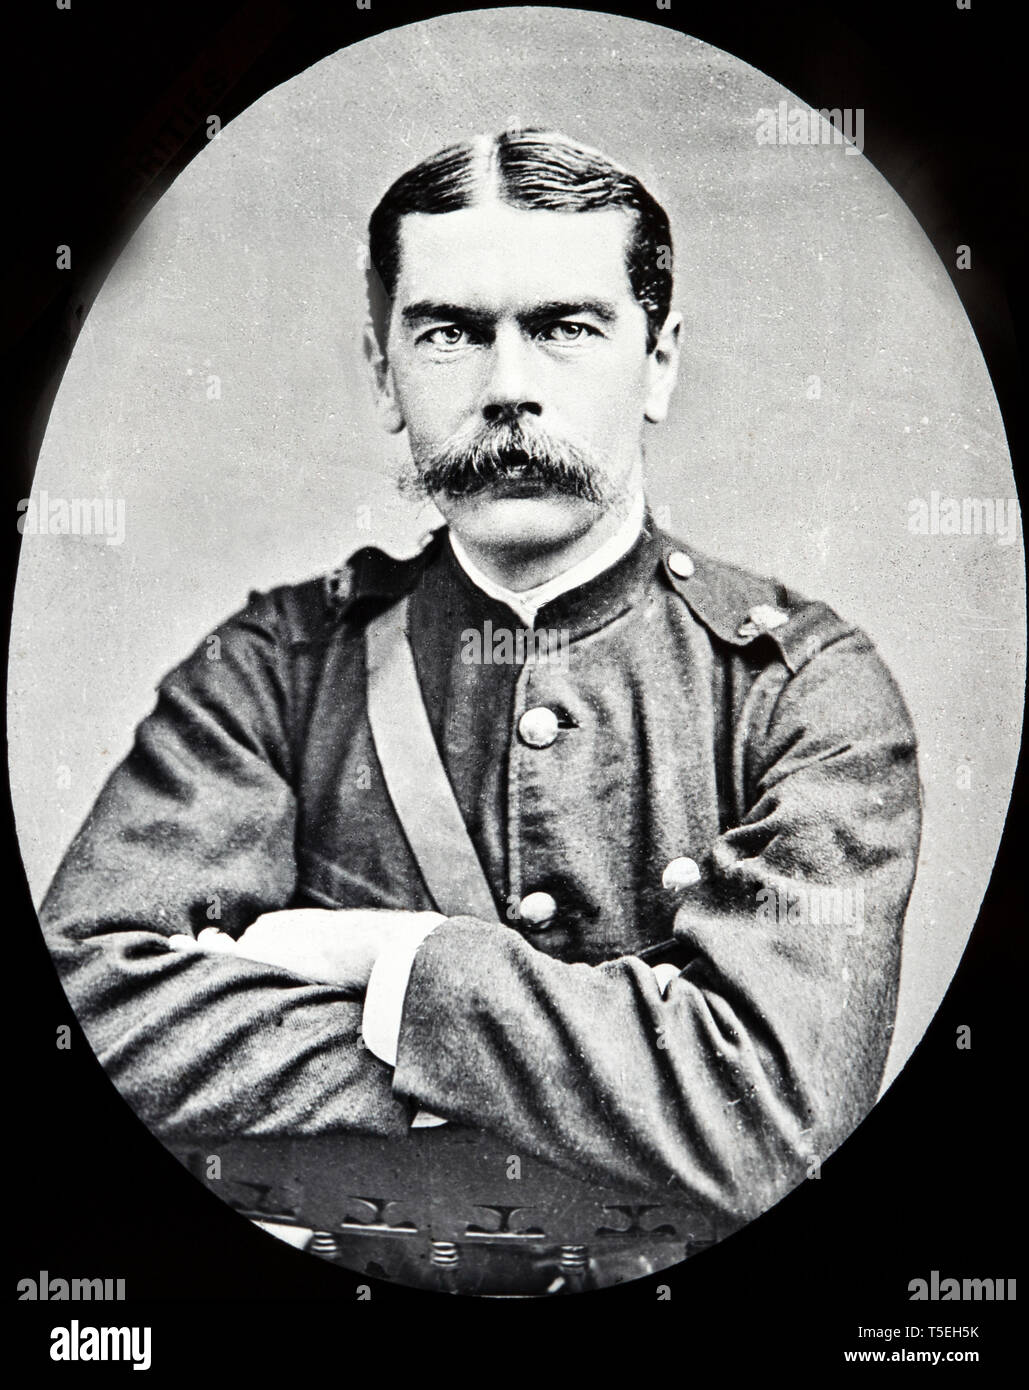 Early photograph of Field Marshal Horatio Herbert Kitchener, 1st Earl Kitchener, KG, KP, GCB, OM, GCSI, GCMG, GCIE, PC (/24 June 1850 – 5 June 1916), a senior British Army officer and colonial administrator who won notoriety for his imperial campaigns, most especially his scorched earth policy against the Boers and his establishment of concentration camps during the Second Boer War, and later played a central role in the early part of the First World War. In 1914, at the start of the First World War, Kitchener became Secretary of State for War, Stock Photo